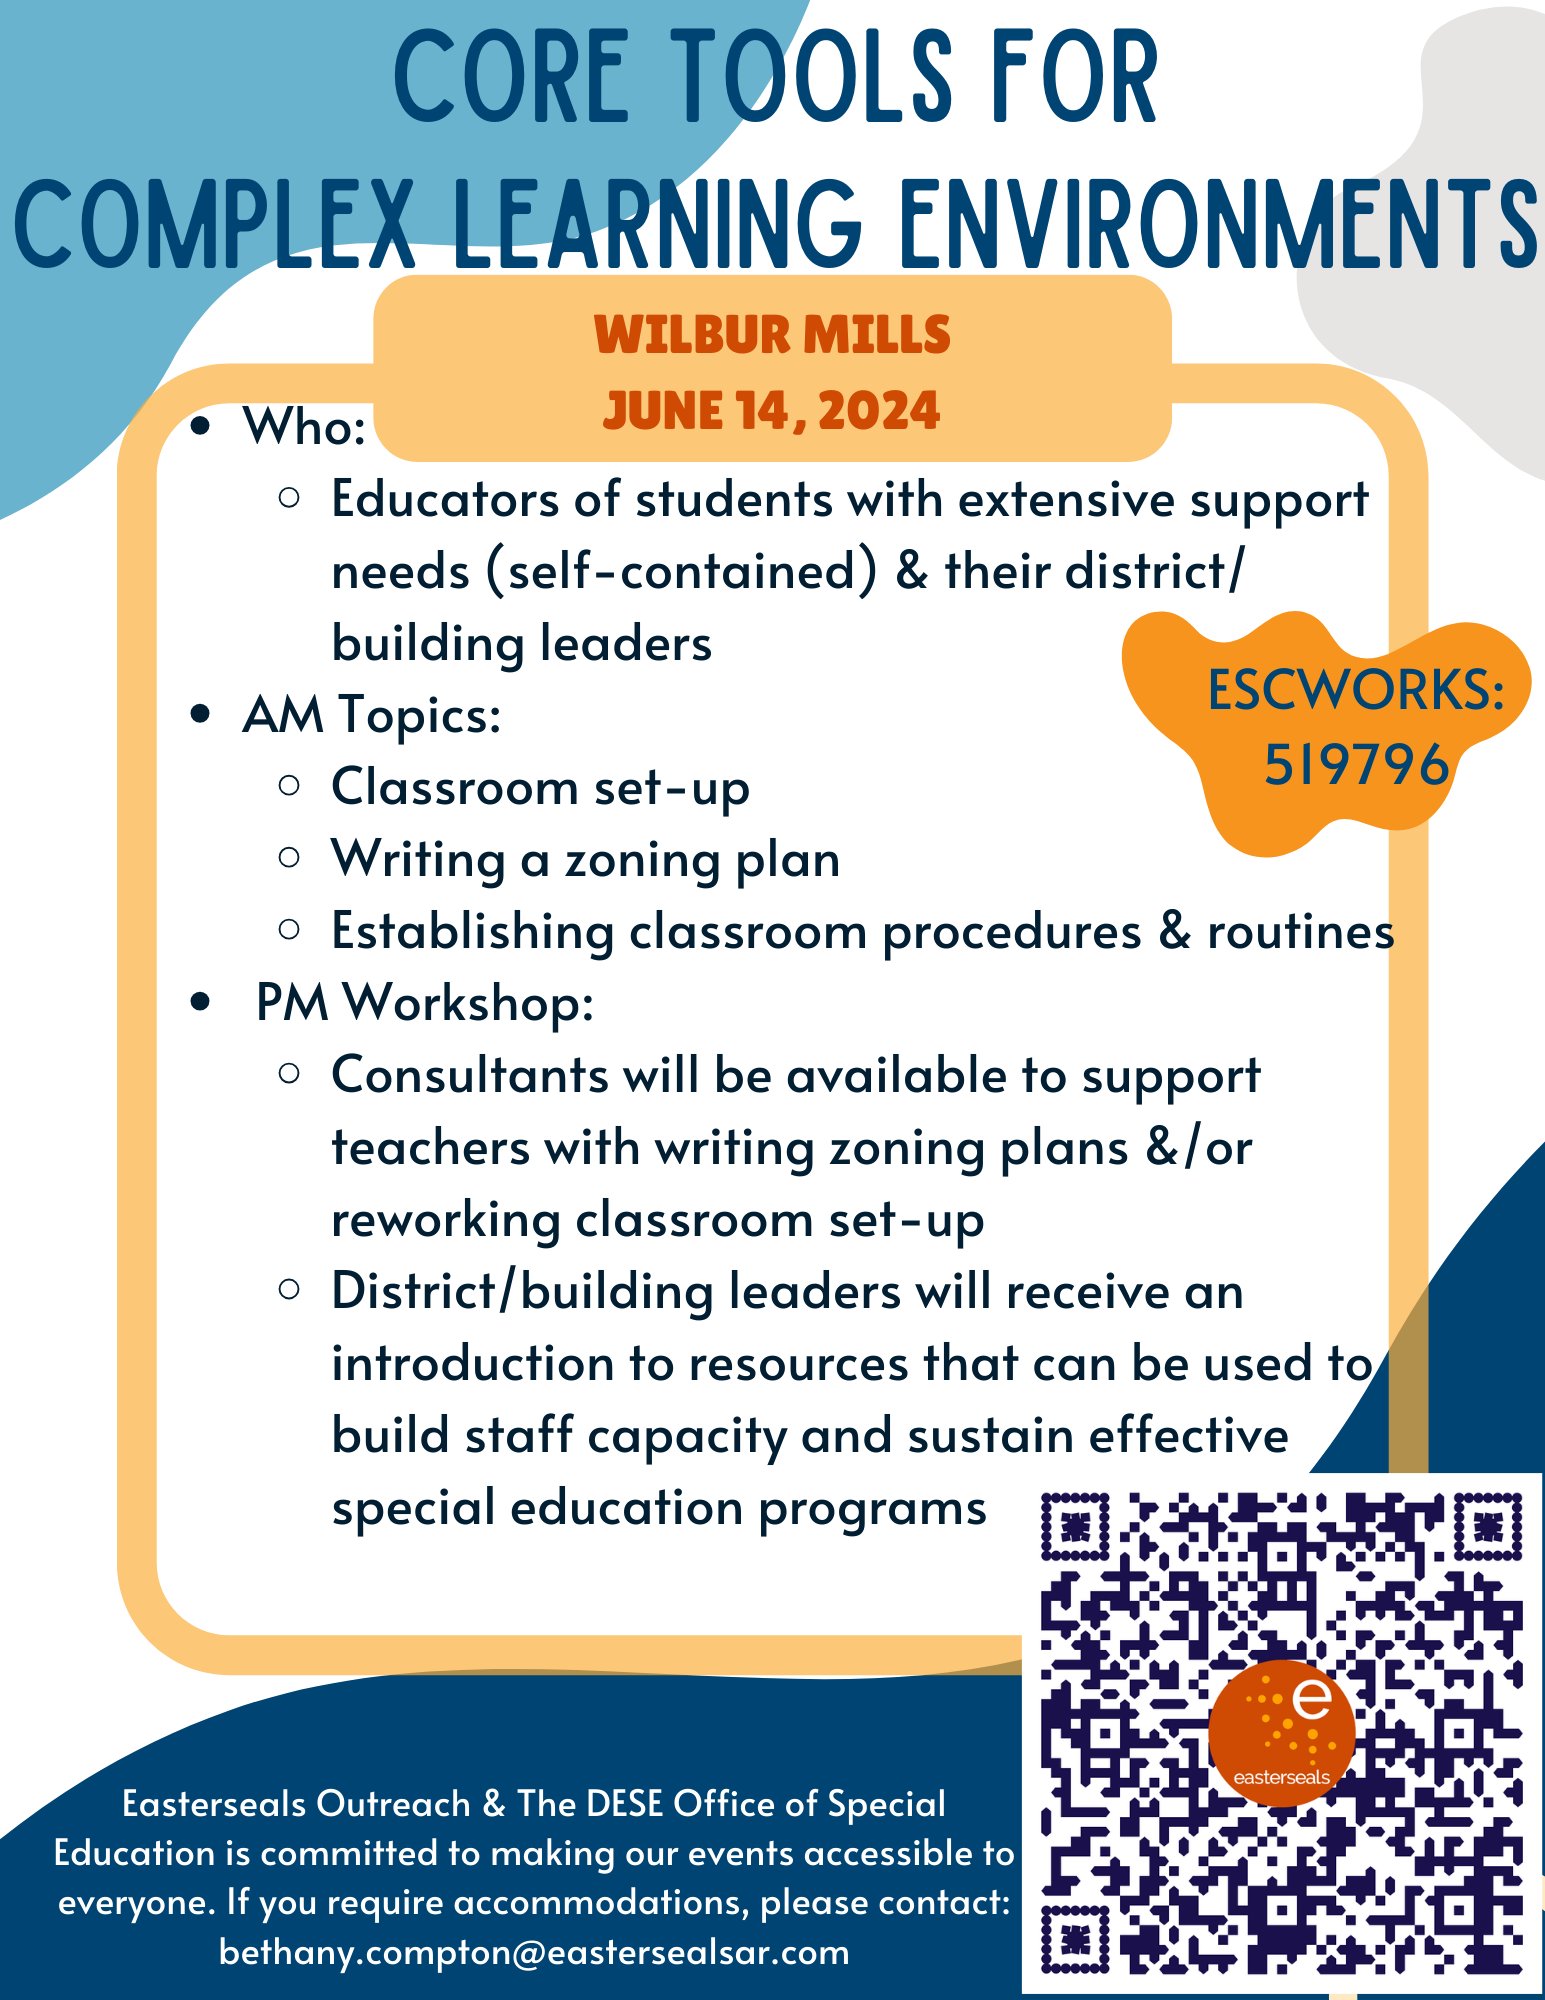 core tools for complex learning environments at Wilbur Mills educational service cooperative